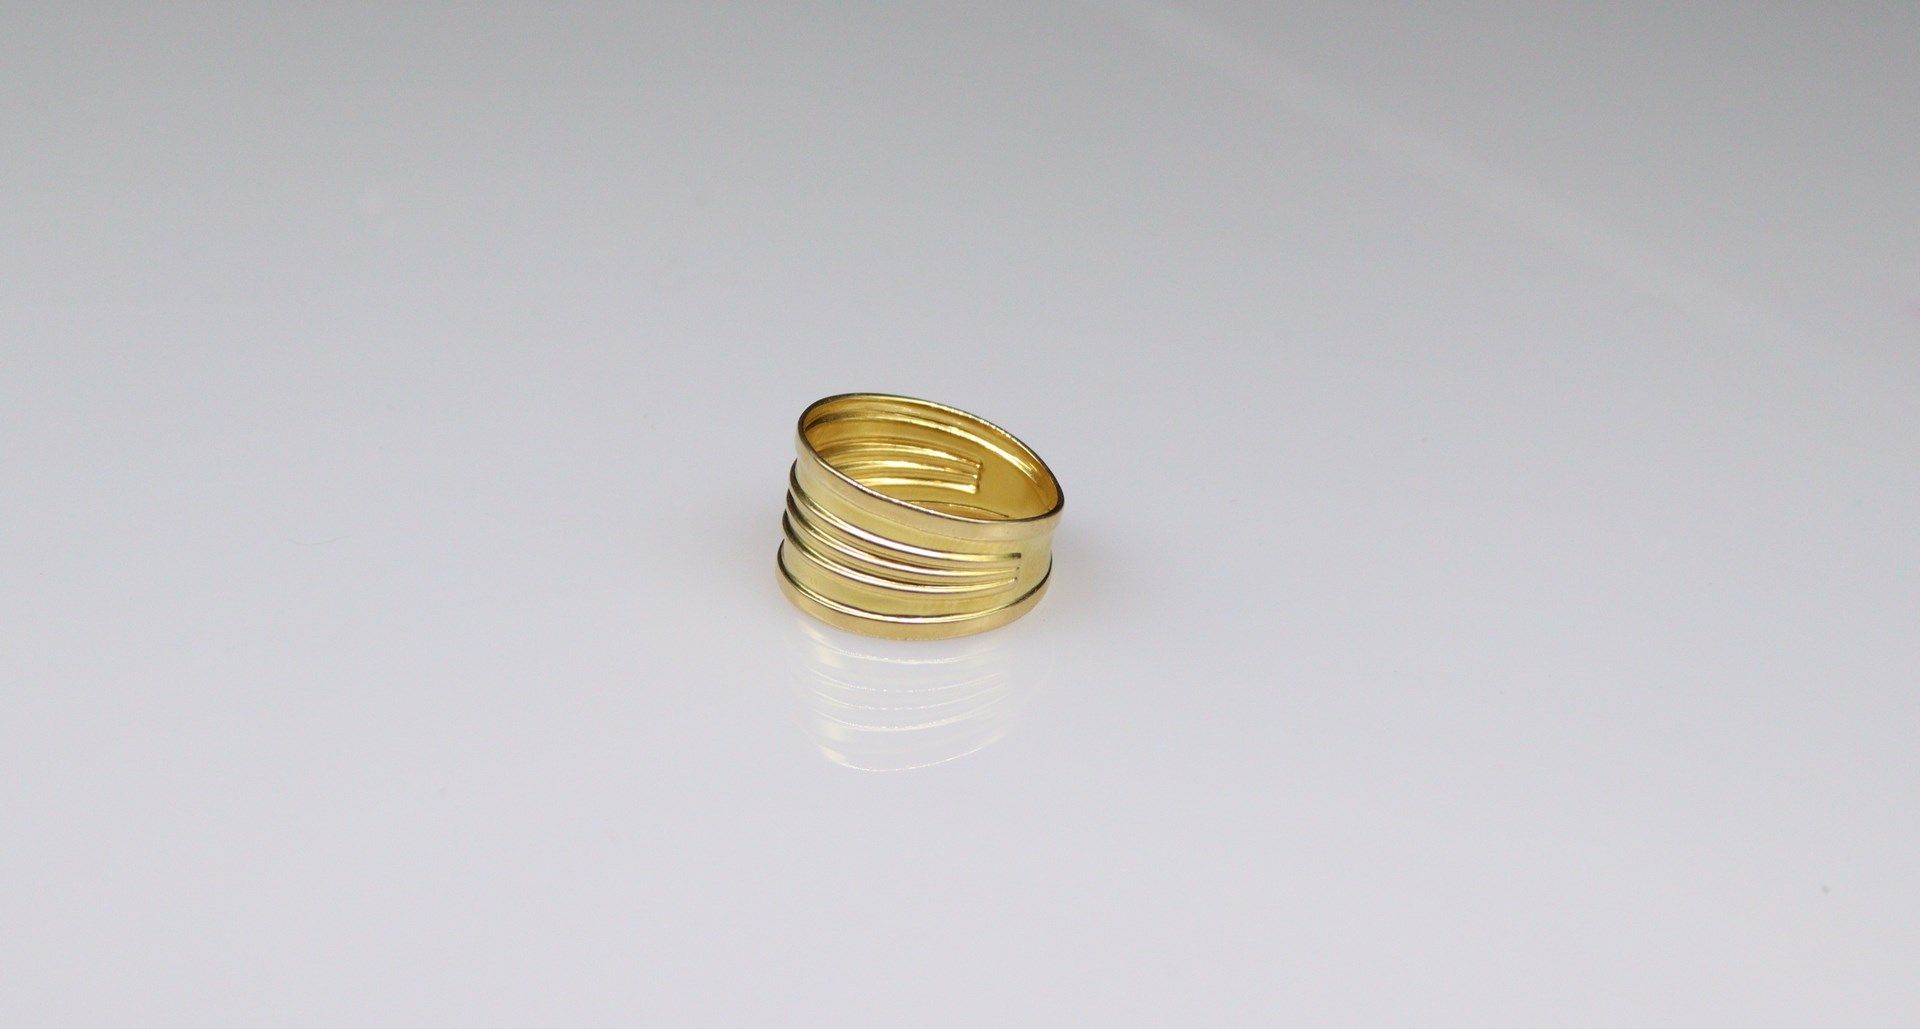 Null Band ring in 18k (750) yellow gold
Finger size : 55 - Weight : 2.5 g.